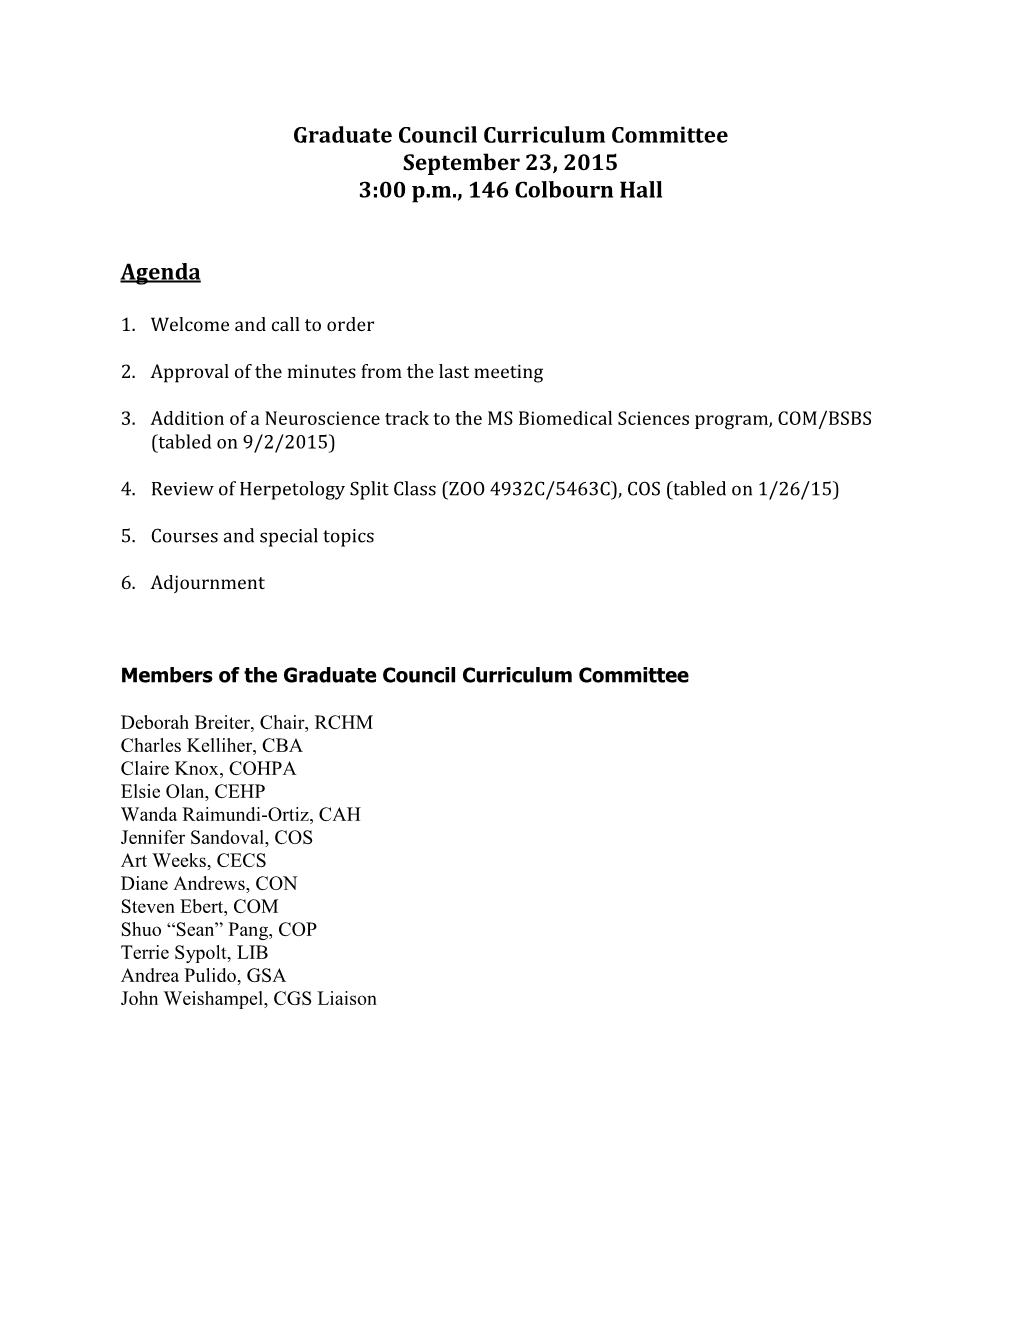 Graduate Council Curriculum Committee September 23, 2015 3:00 P.M., 146 Colbourn Hall